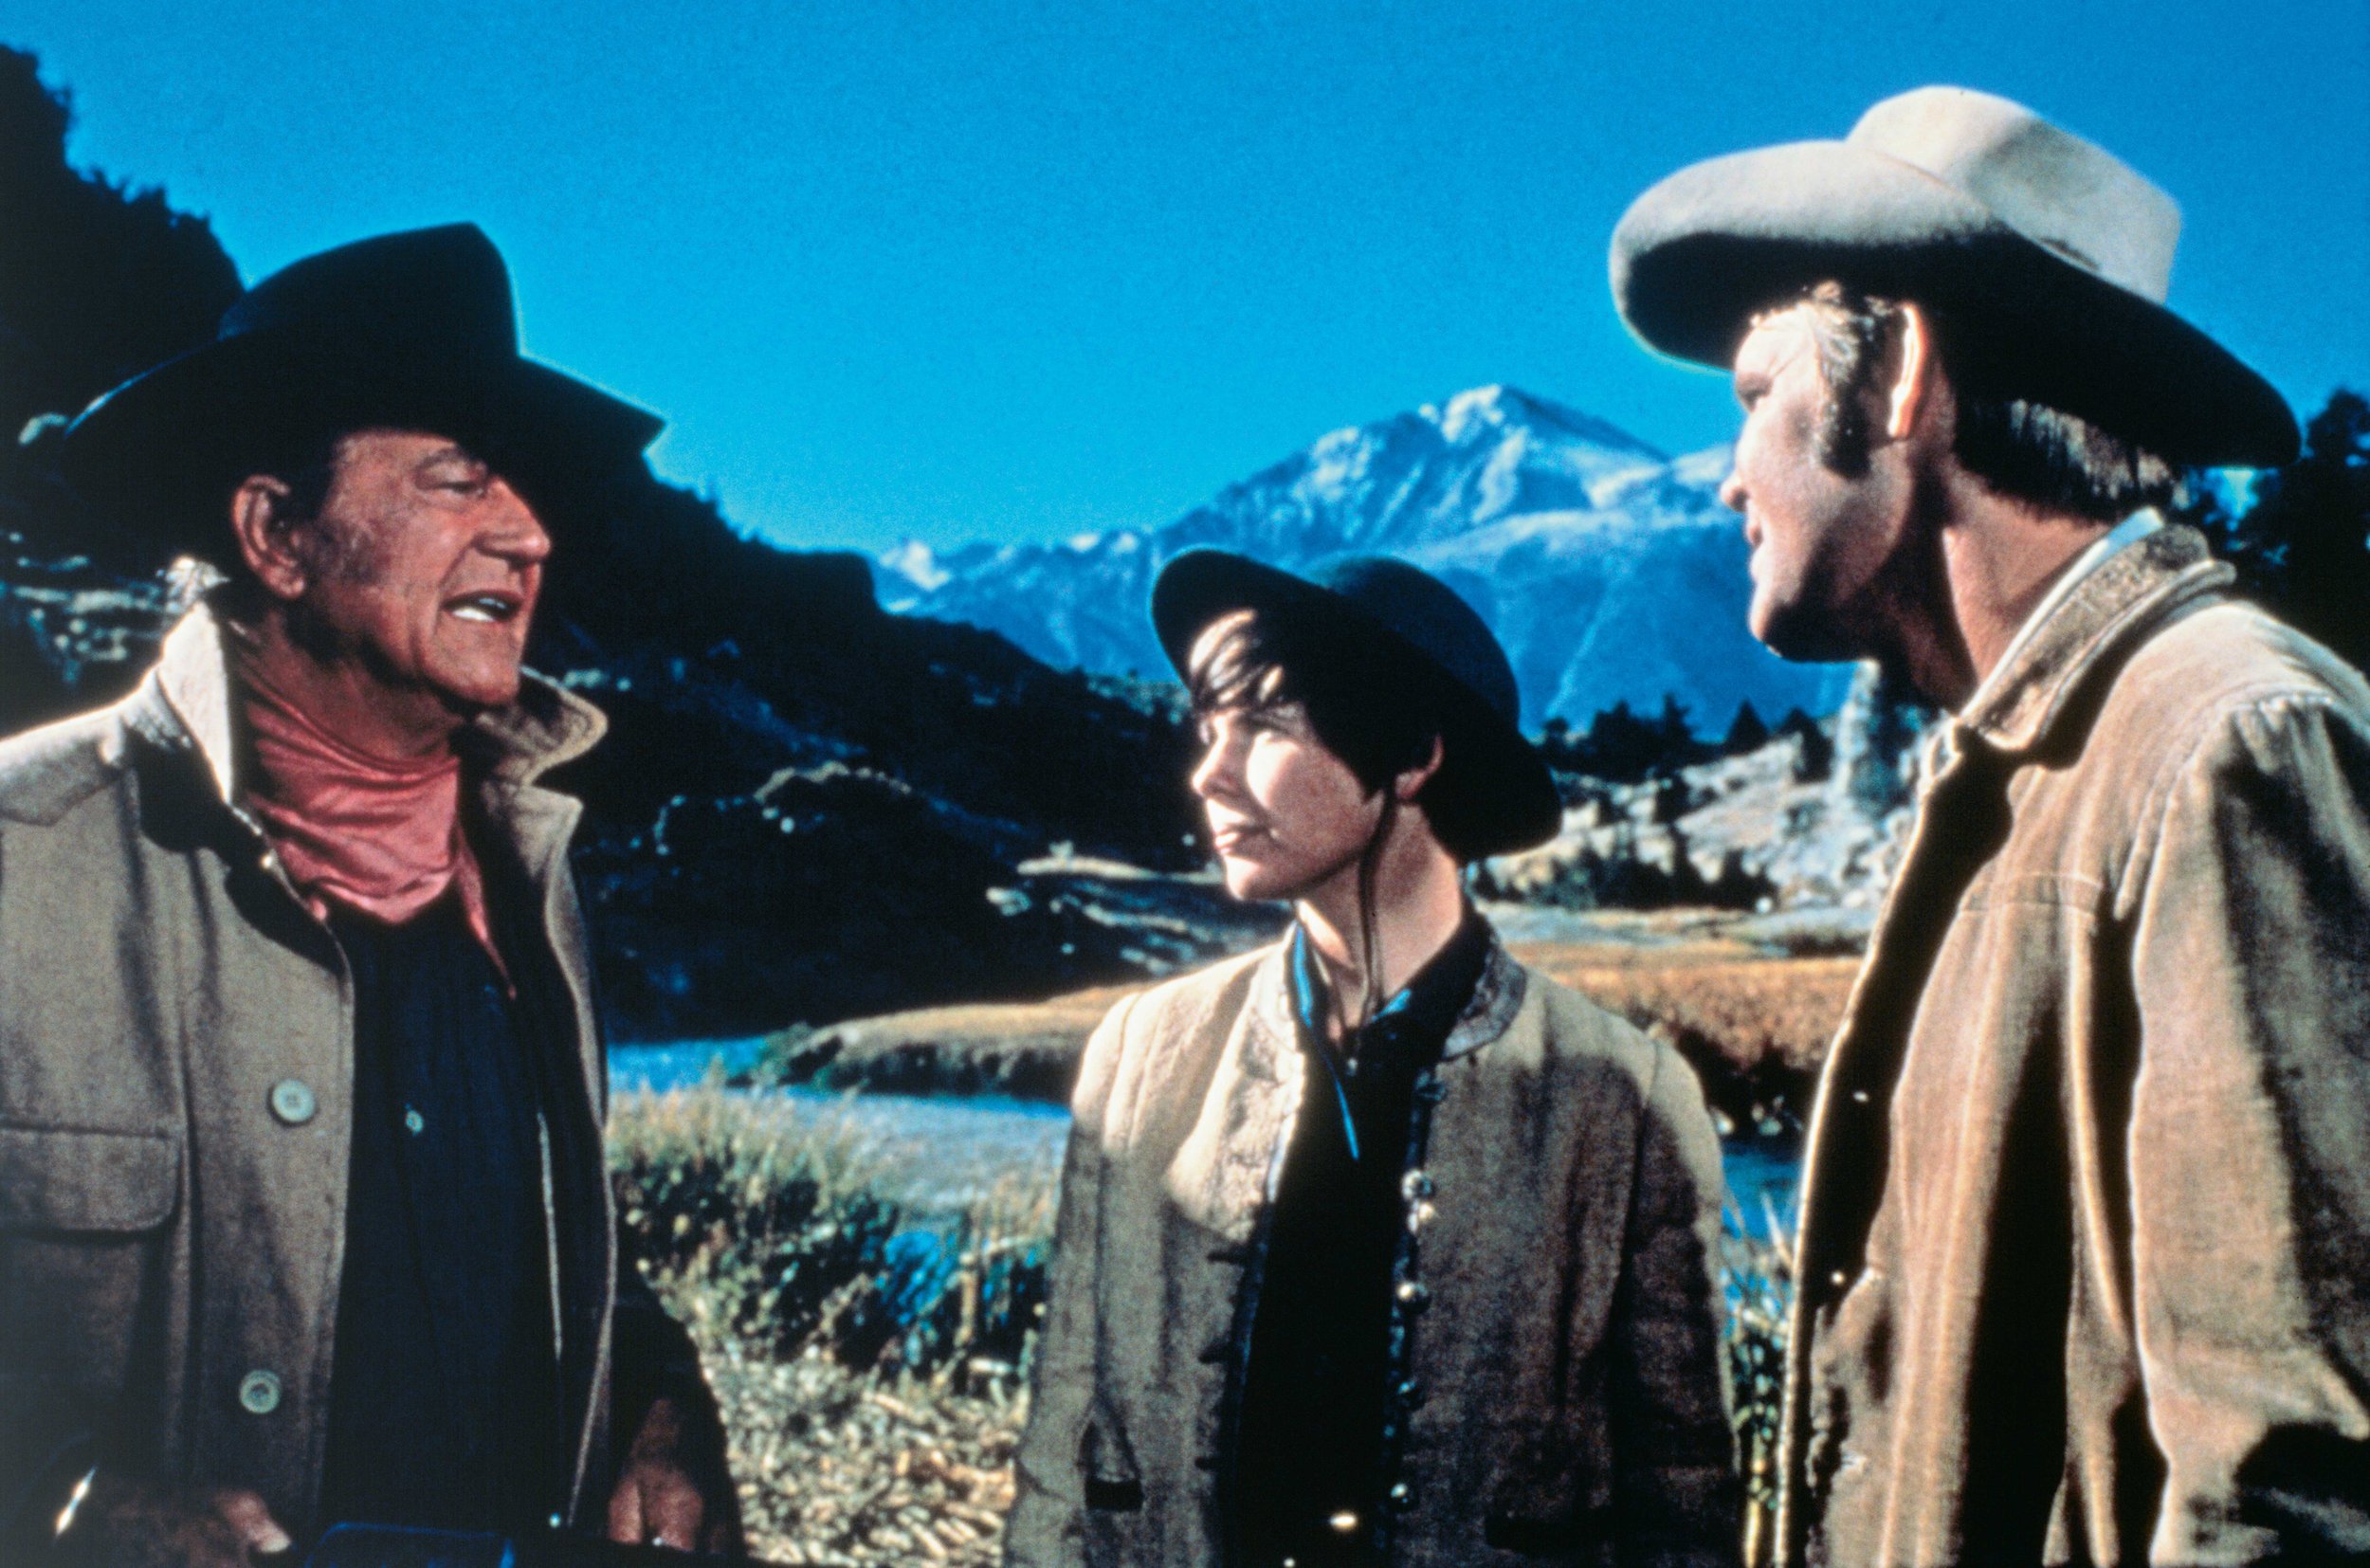 John Wayne, Kim Darby and Glen Campbell. ©2019 Paramount Pictures. All Rights Reserved.